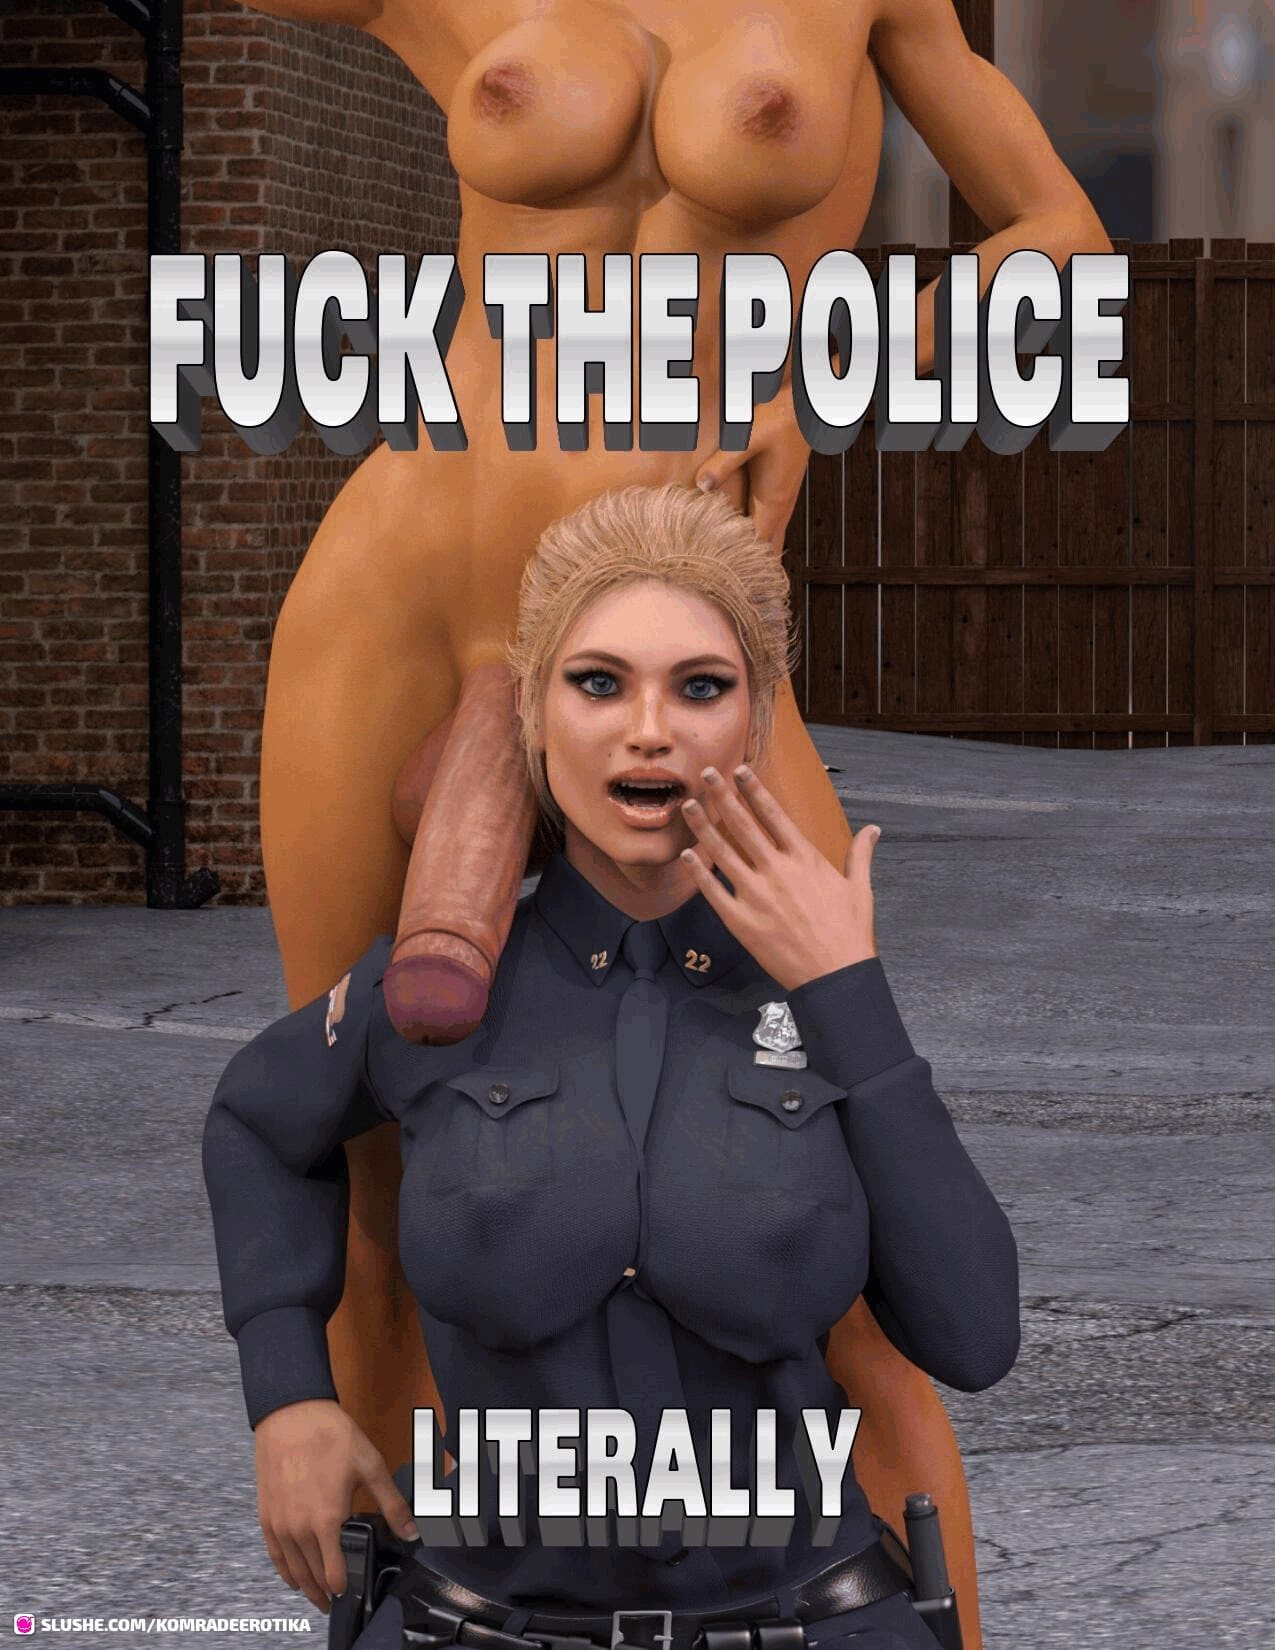 Fuck The Police Literally - Shemale - FreeAdultComix